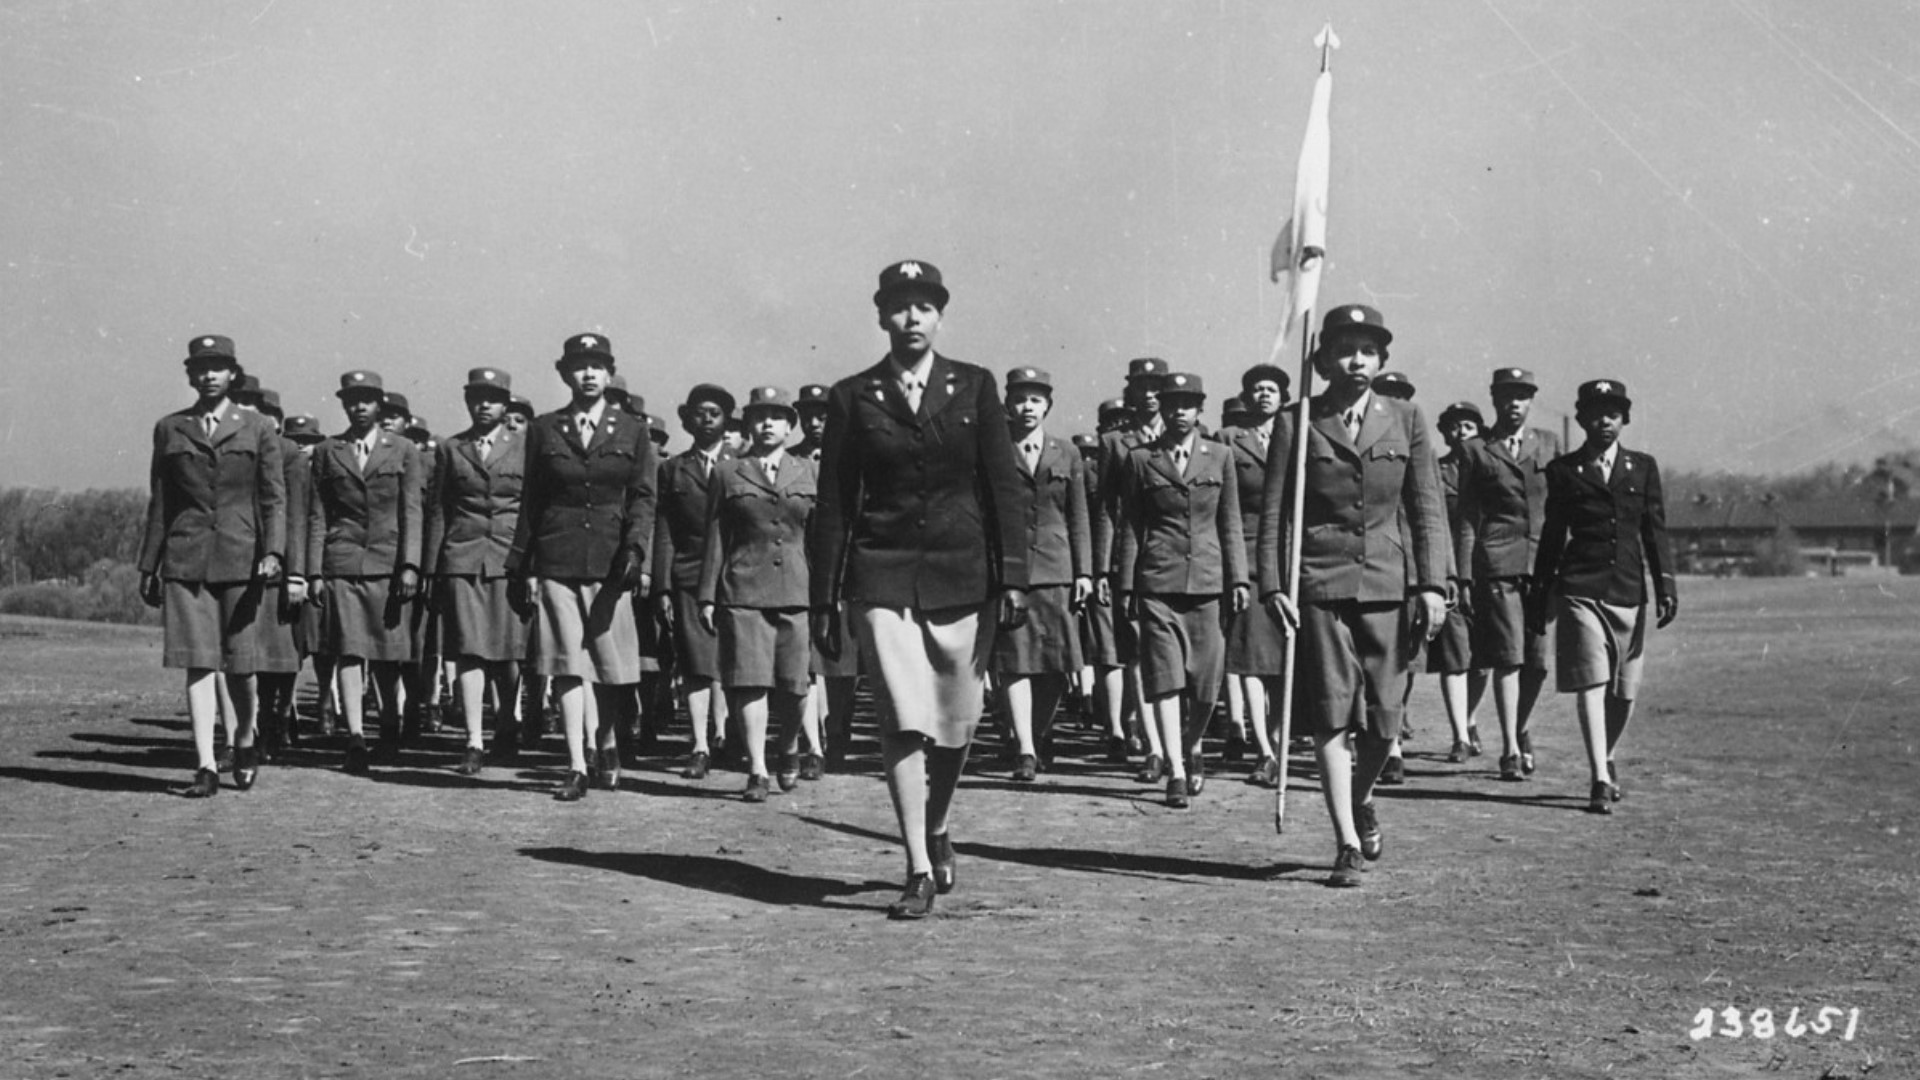 In 1945, the "Six Triple Eight" Central Postal Directory Battalion was the only all-female, all-black, Army battalion sent to World War II and Europe.